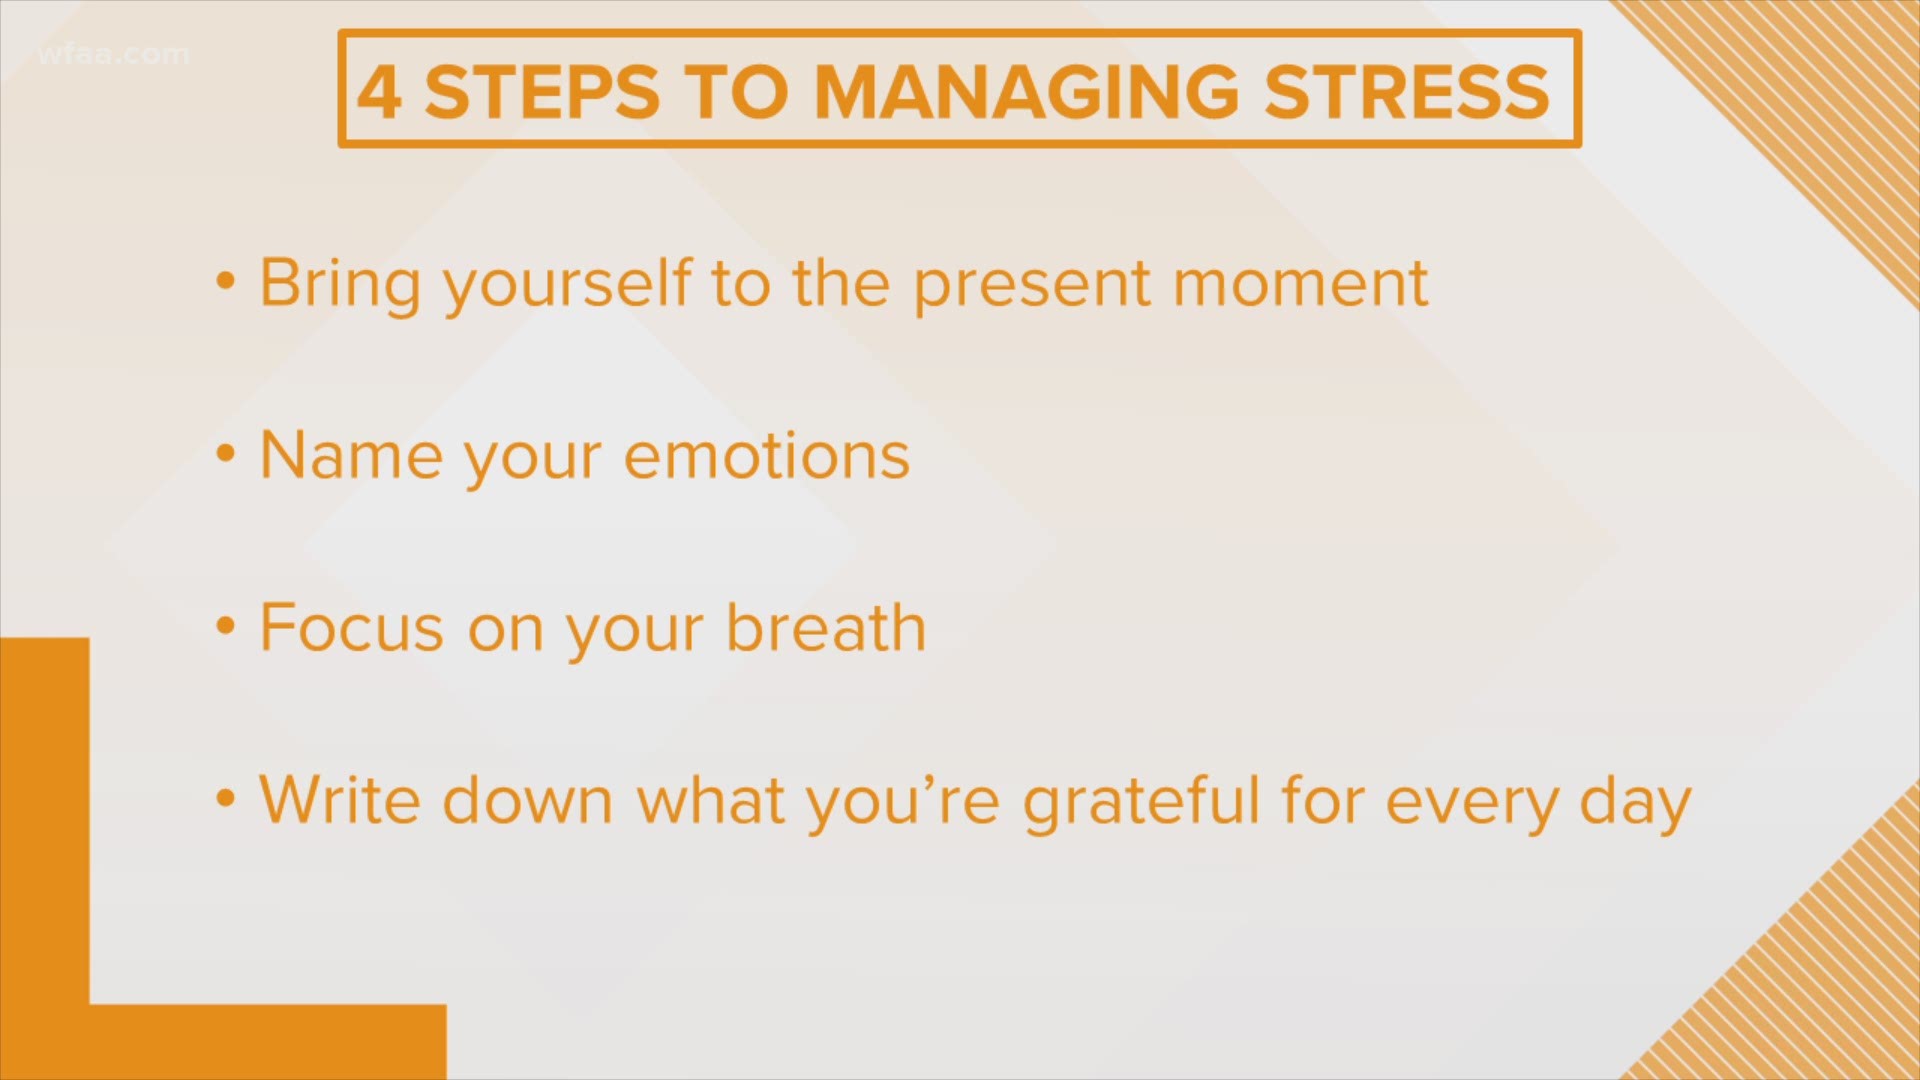 These are four things students can do to help manage stress.